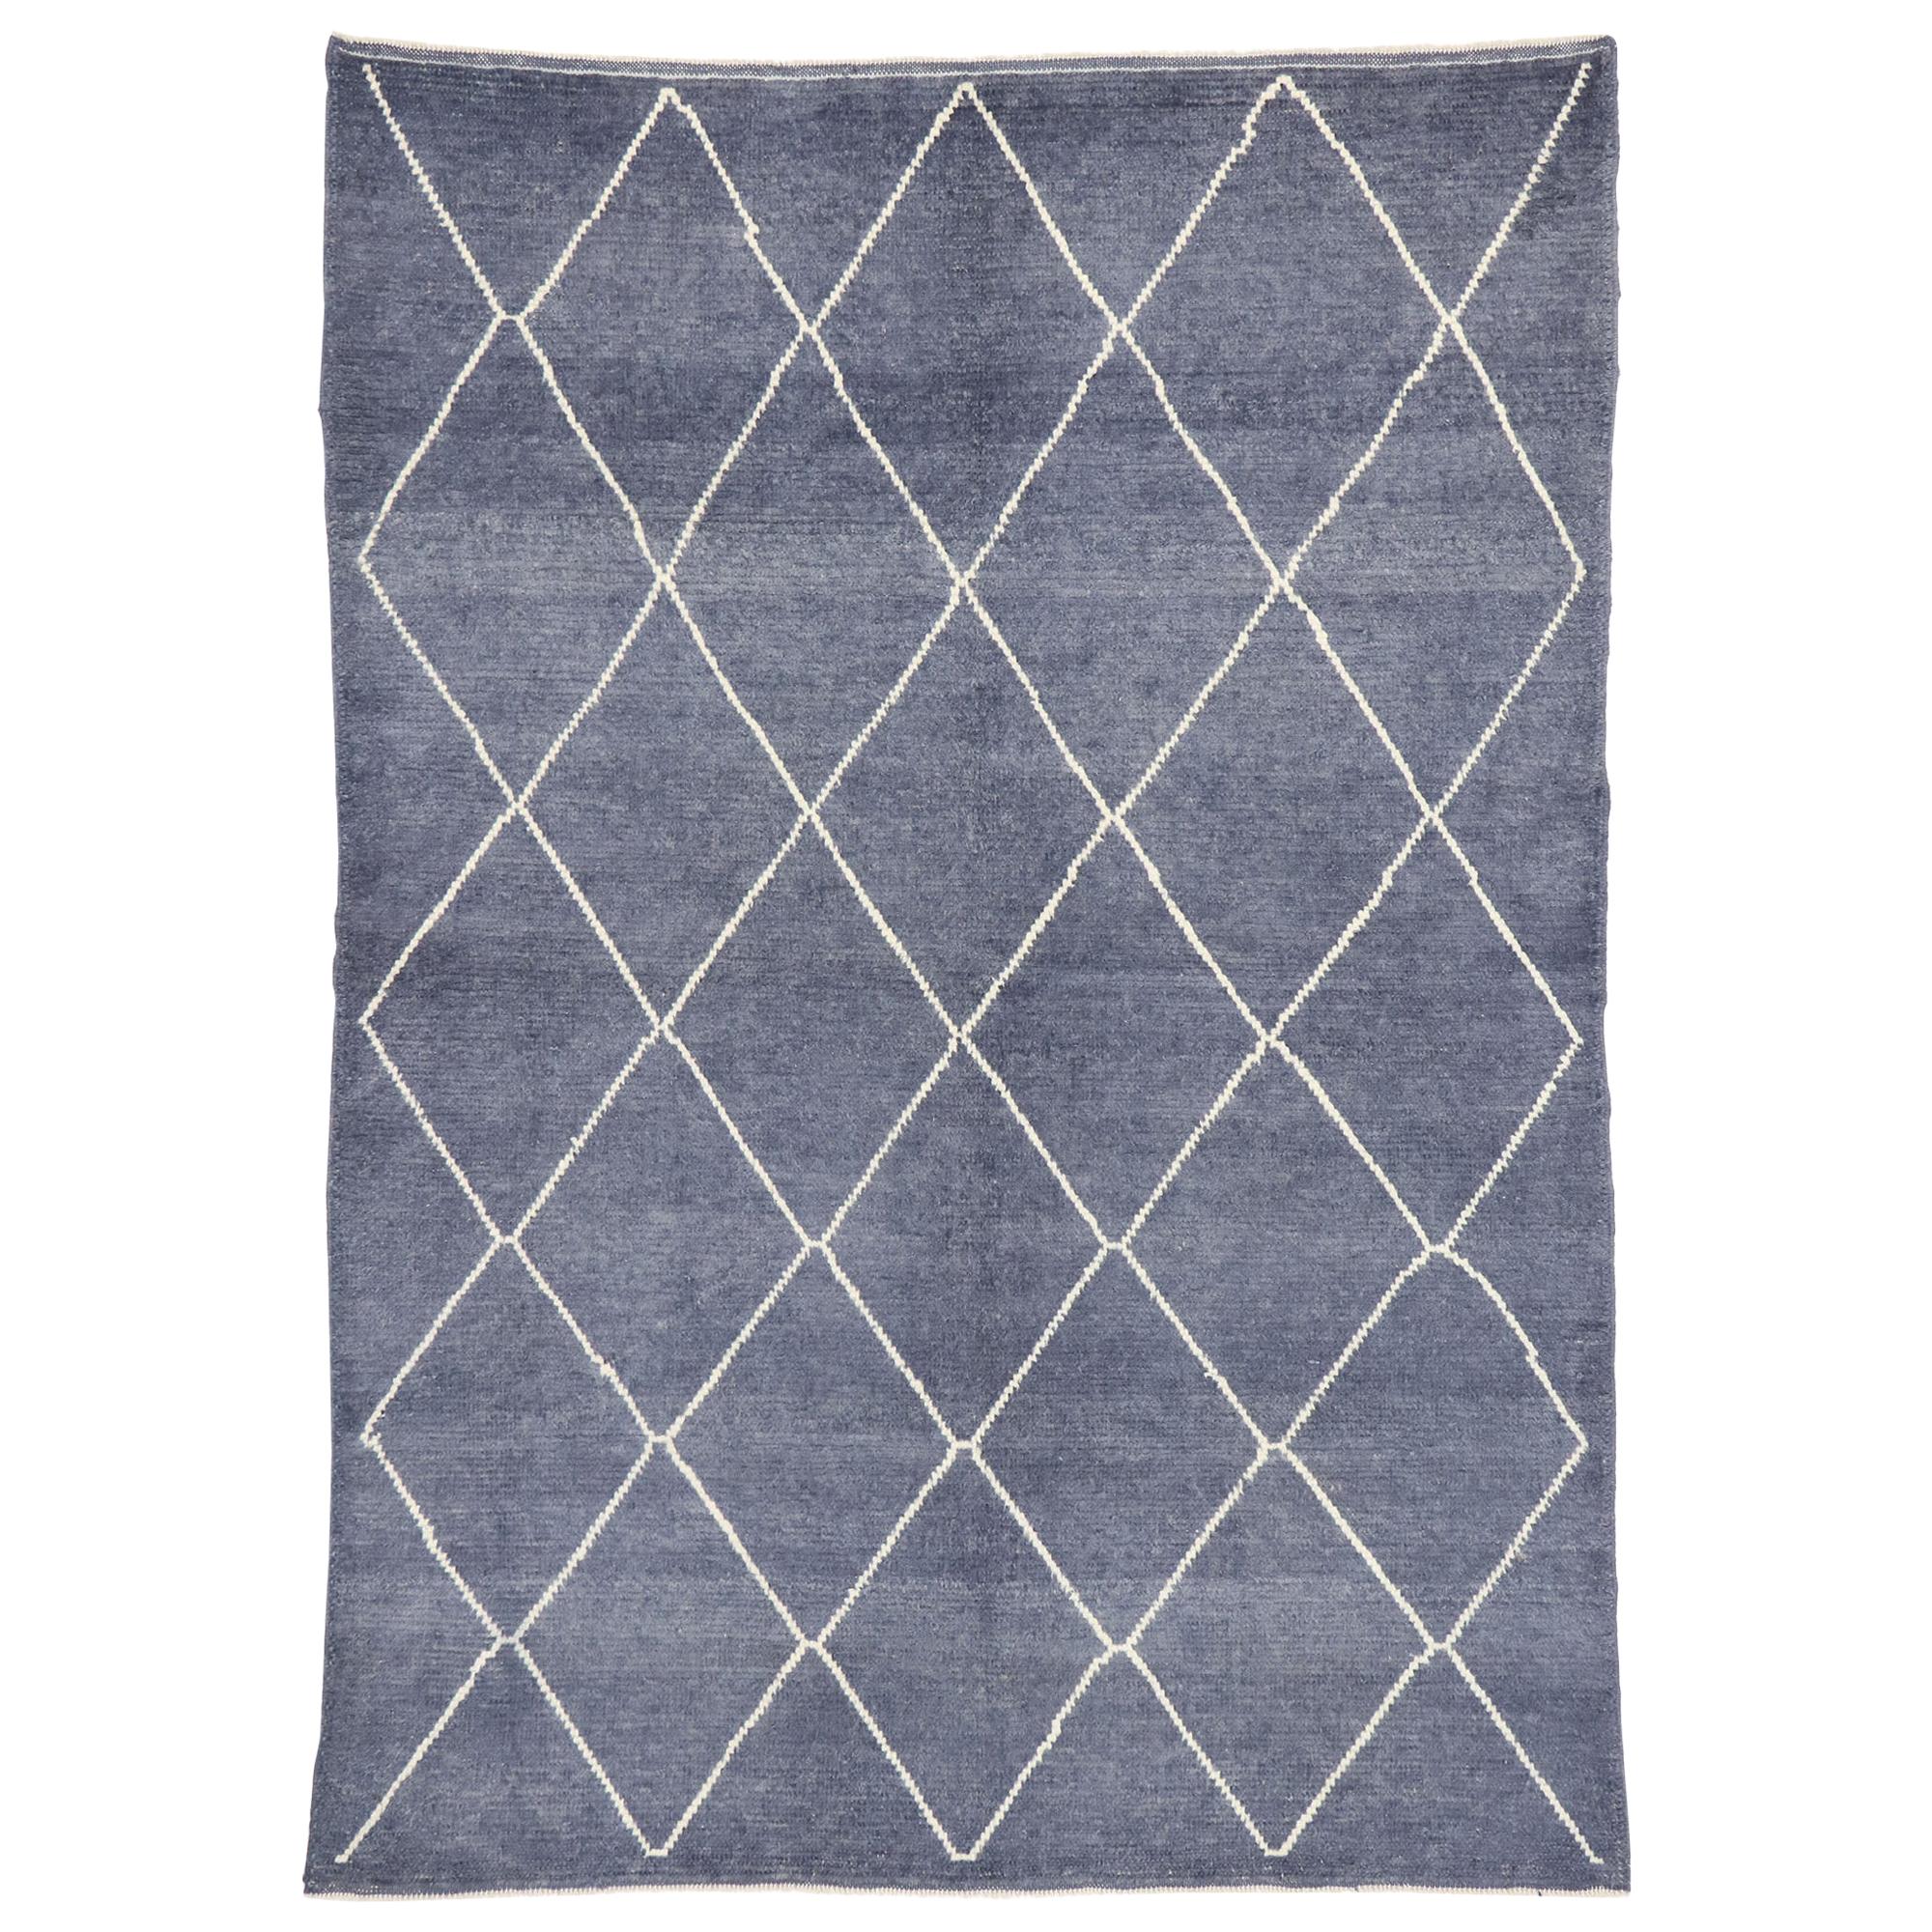 New Contemporary Moroccan Style Rug with Diamond Trellis